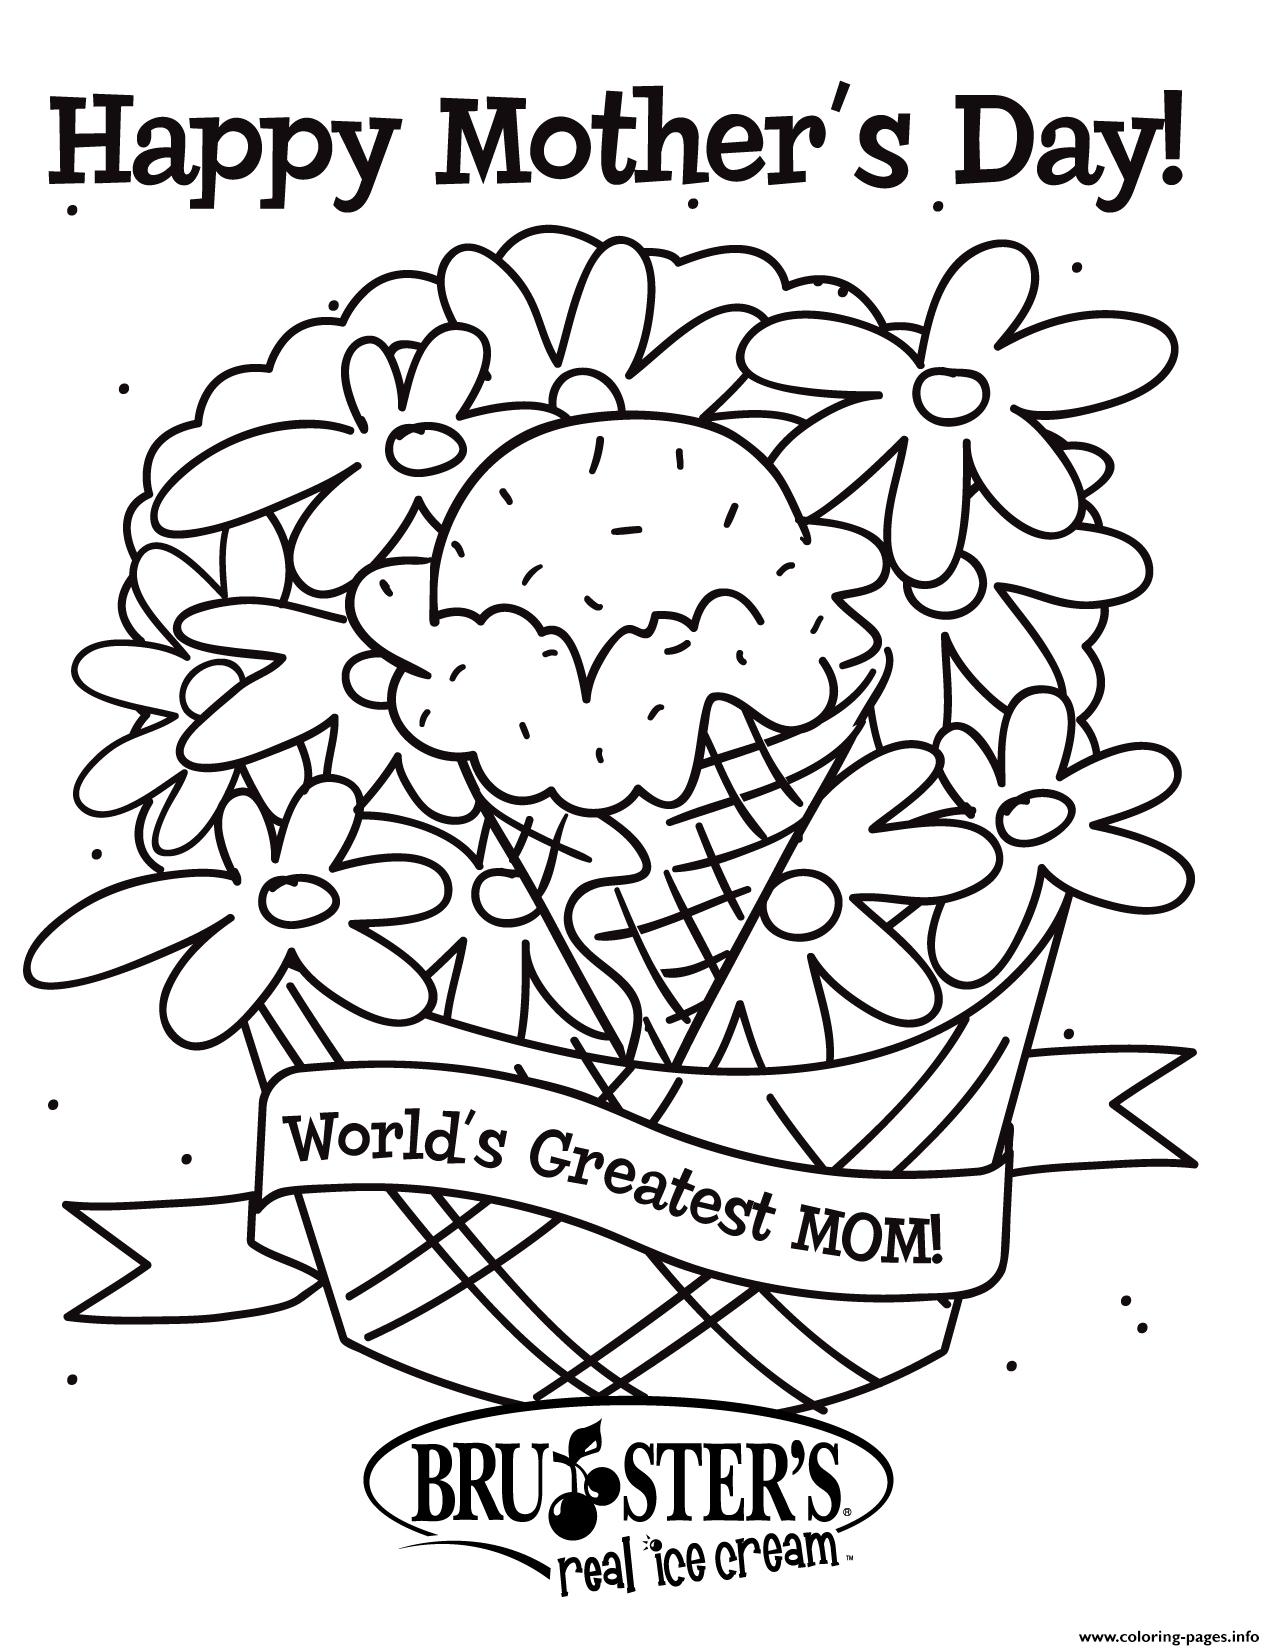 happy-mother-s-day-worlds-greatest-mom-ever-coloring-pages-printable